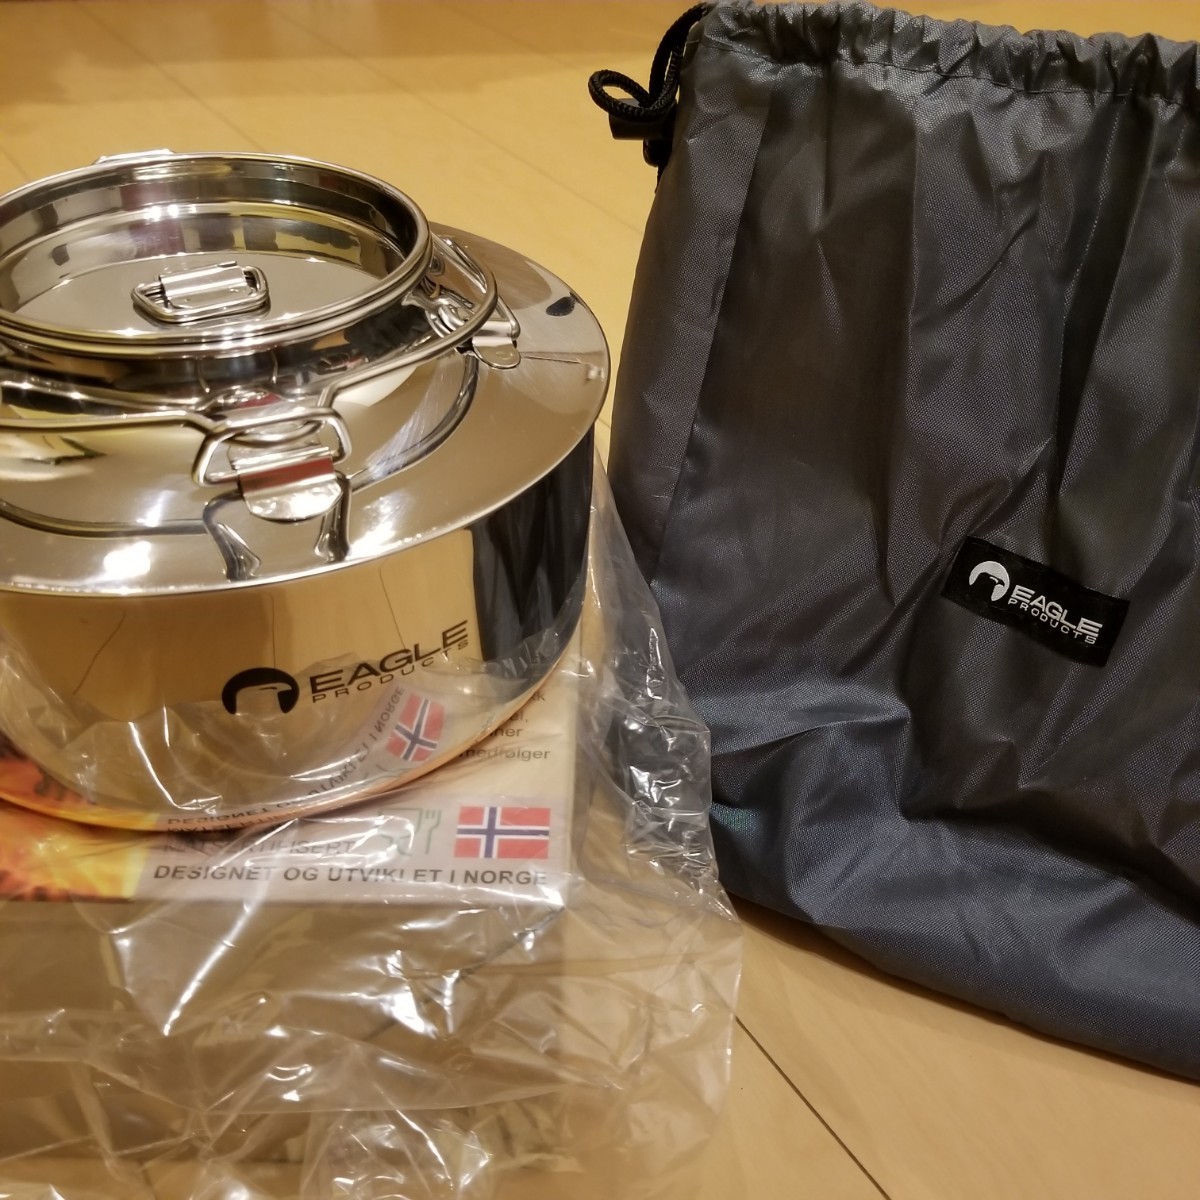 EAGLEPRODUCTS 1.5L ケトル 